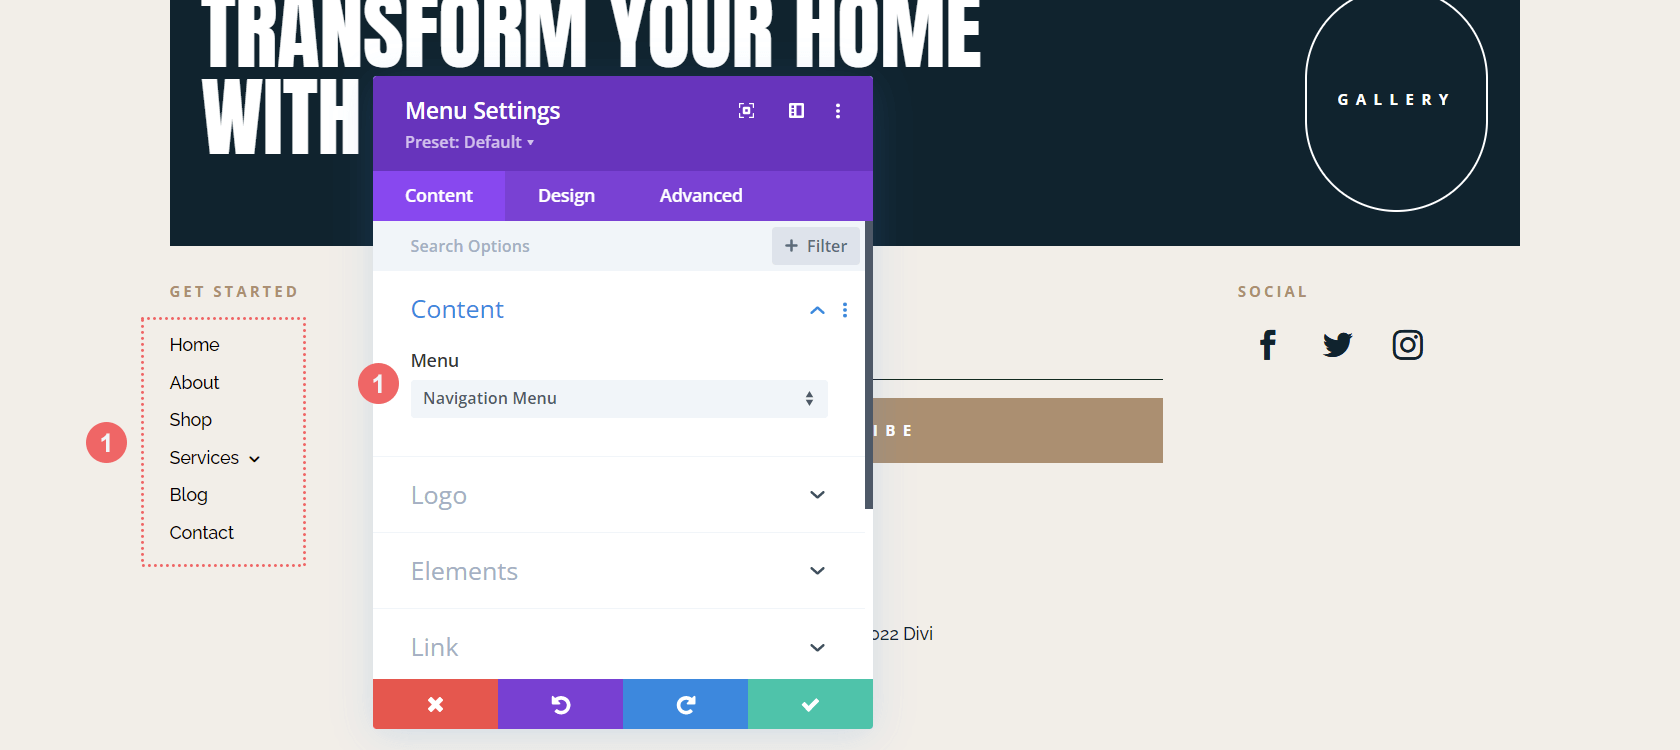 Select menu for footer Menu Module in your home remodeling template